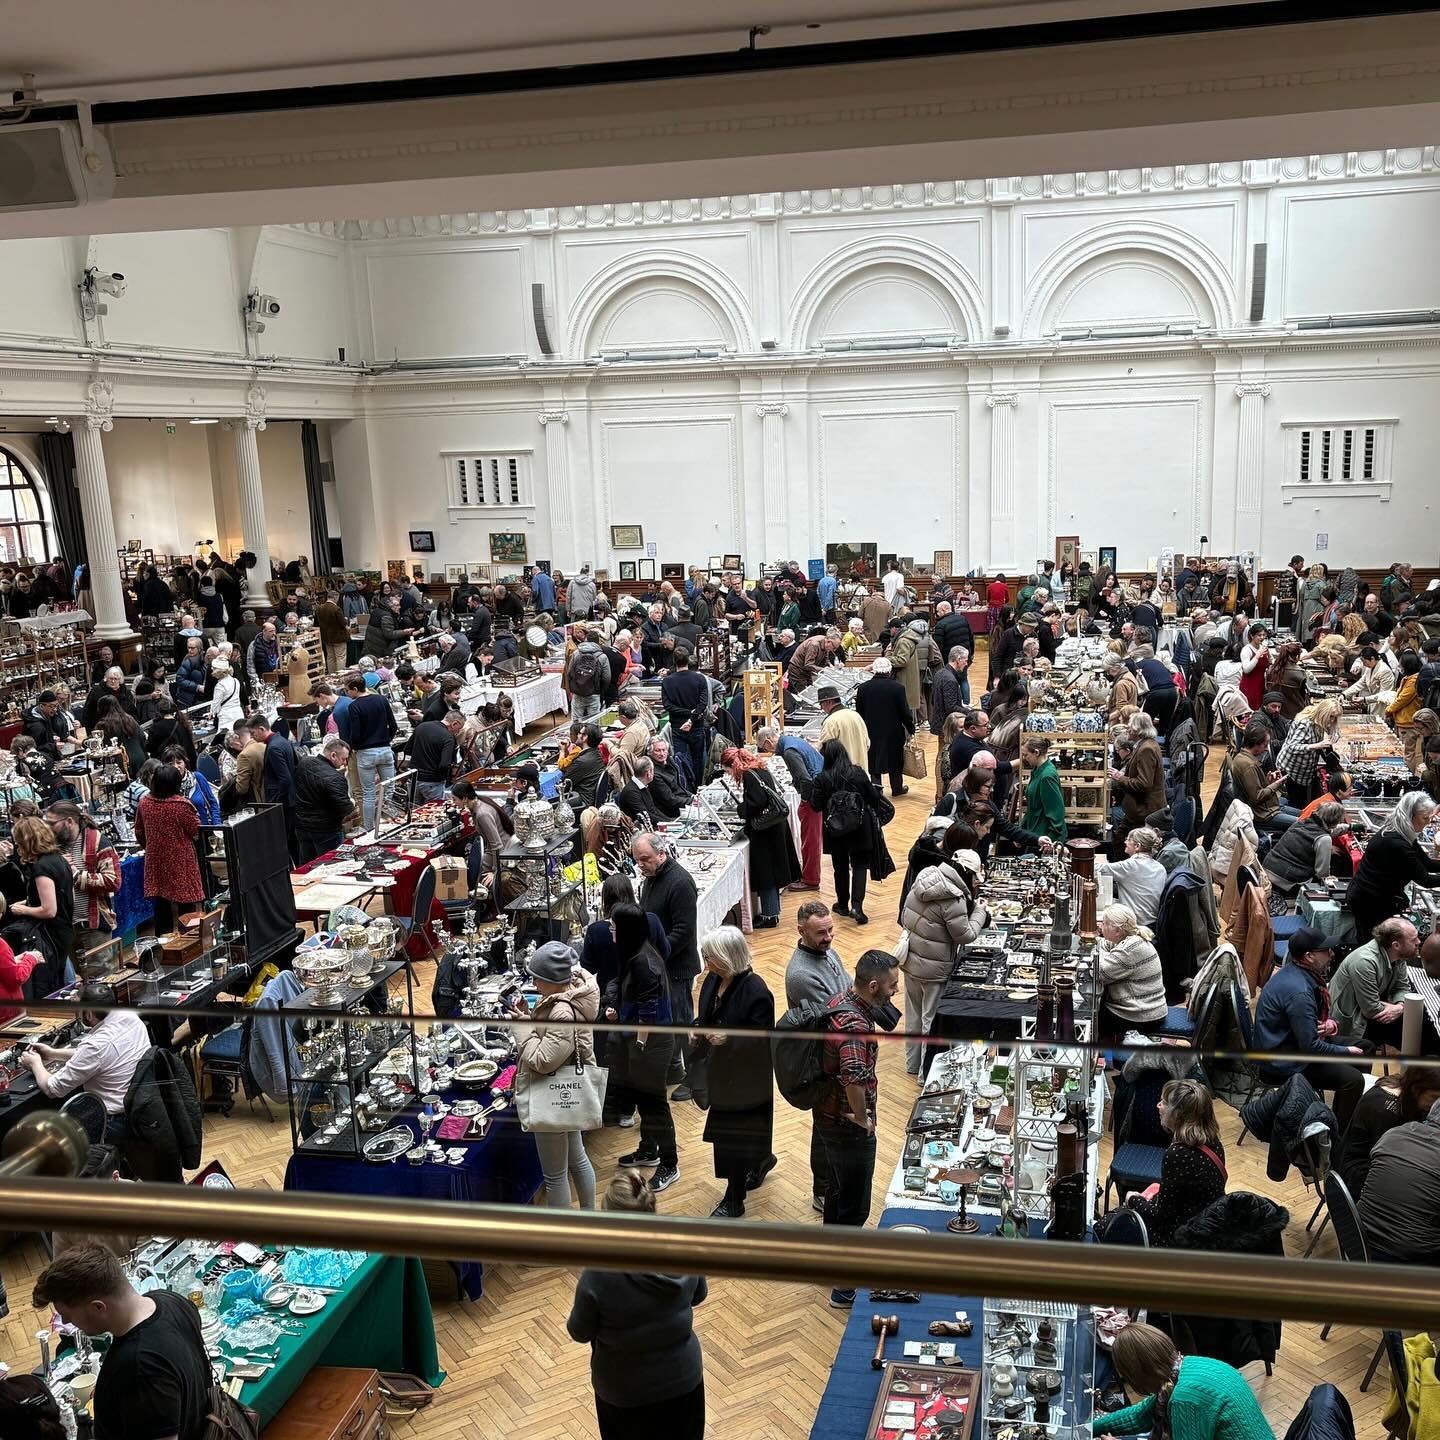 March &ldquo;Horti&rdquo; antiques fair 🌱 This time next week we will be busy setting up for our antiques fair at The Royal Horticultural Halls in Victoria with over 120 exhibitors 

Tickets are available online👇
https://HortiMarch2024.eventbrite.c